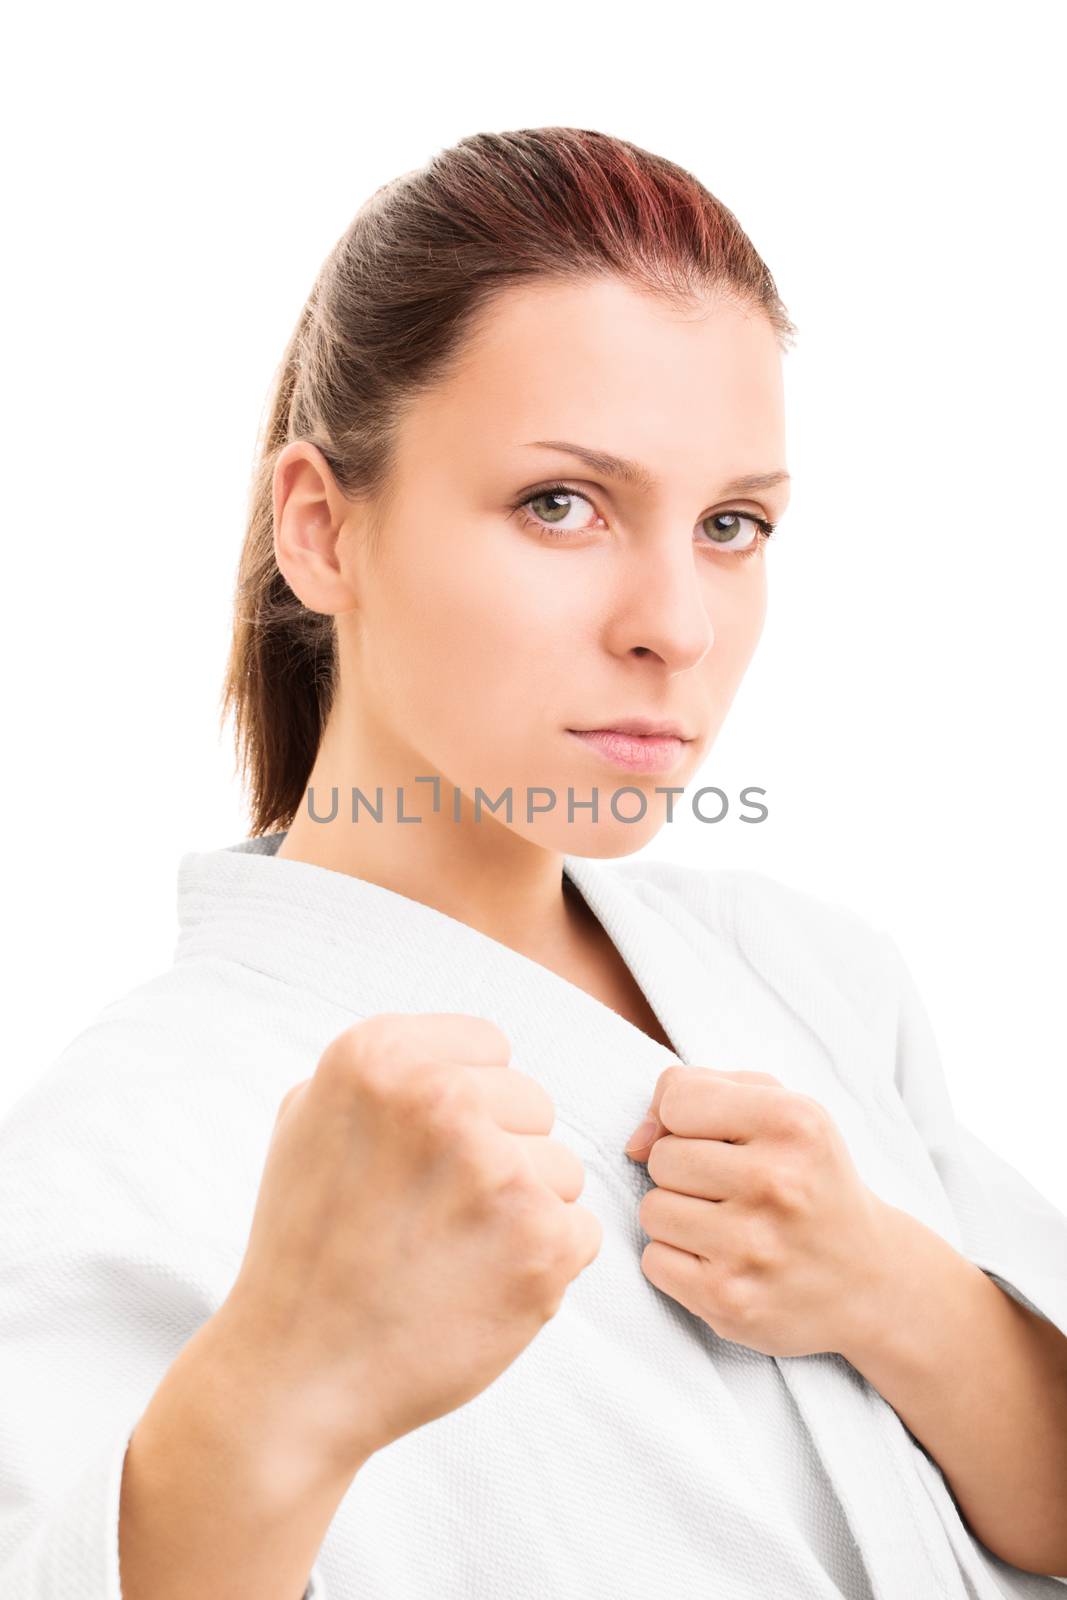 A close up portrait of a young girl in kimono with the fists up, isolated on white background.